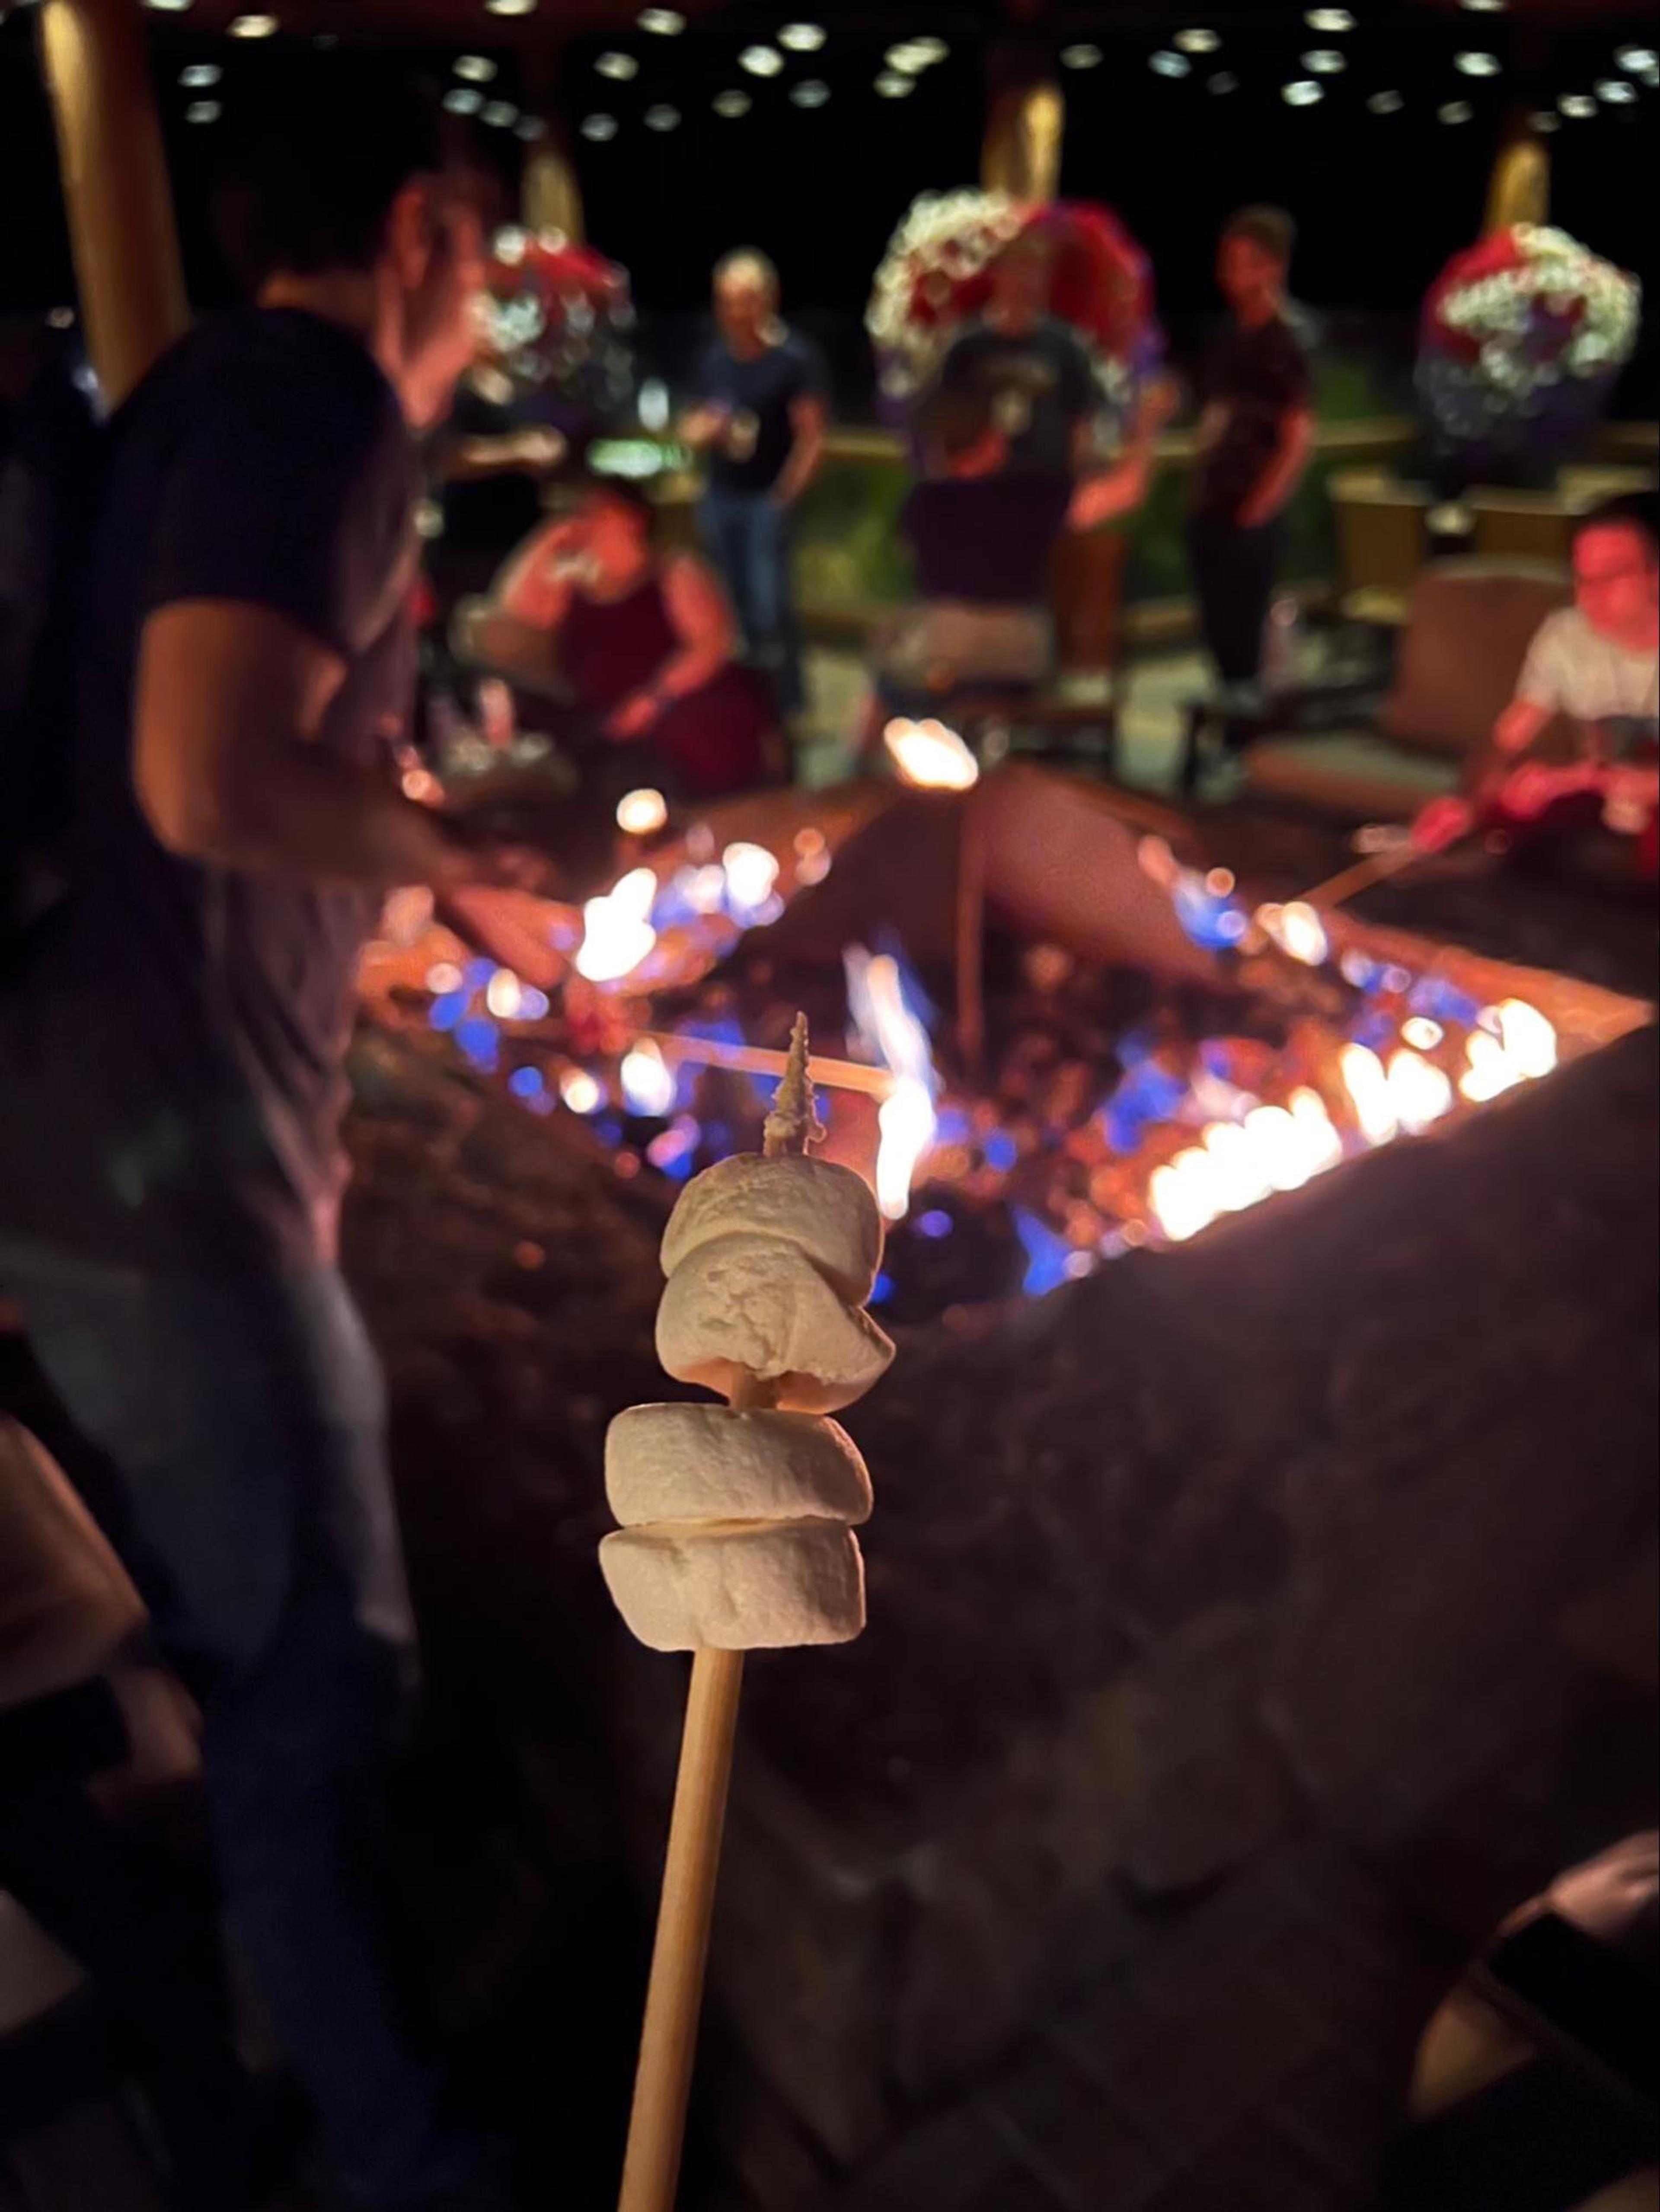 A stick holding several marshmallows being roasted over a campfire